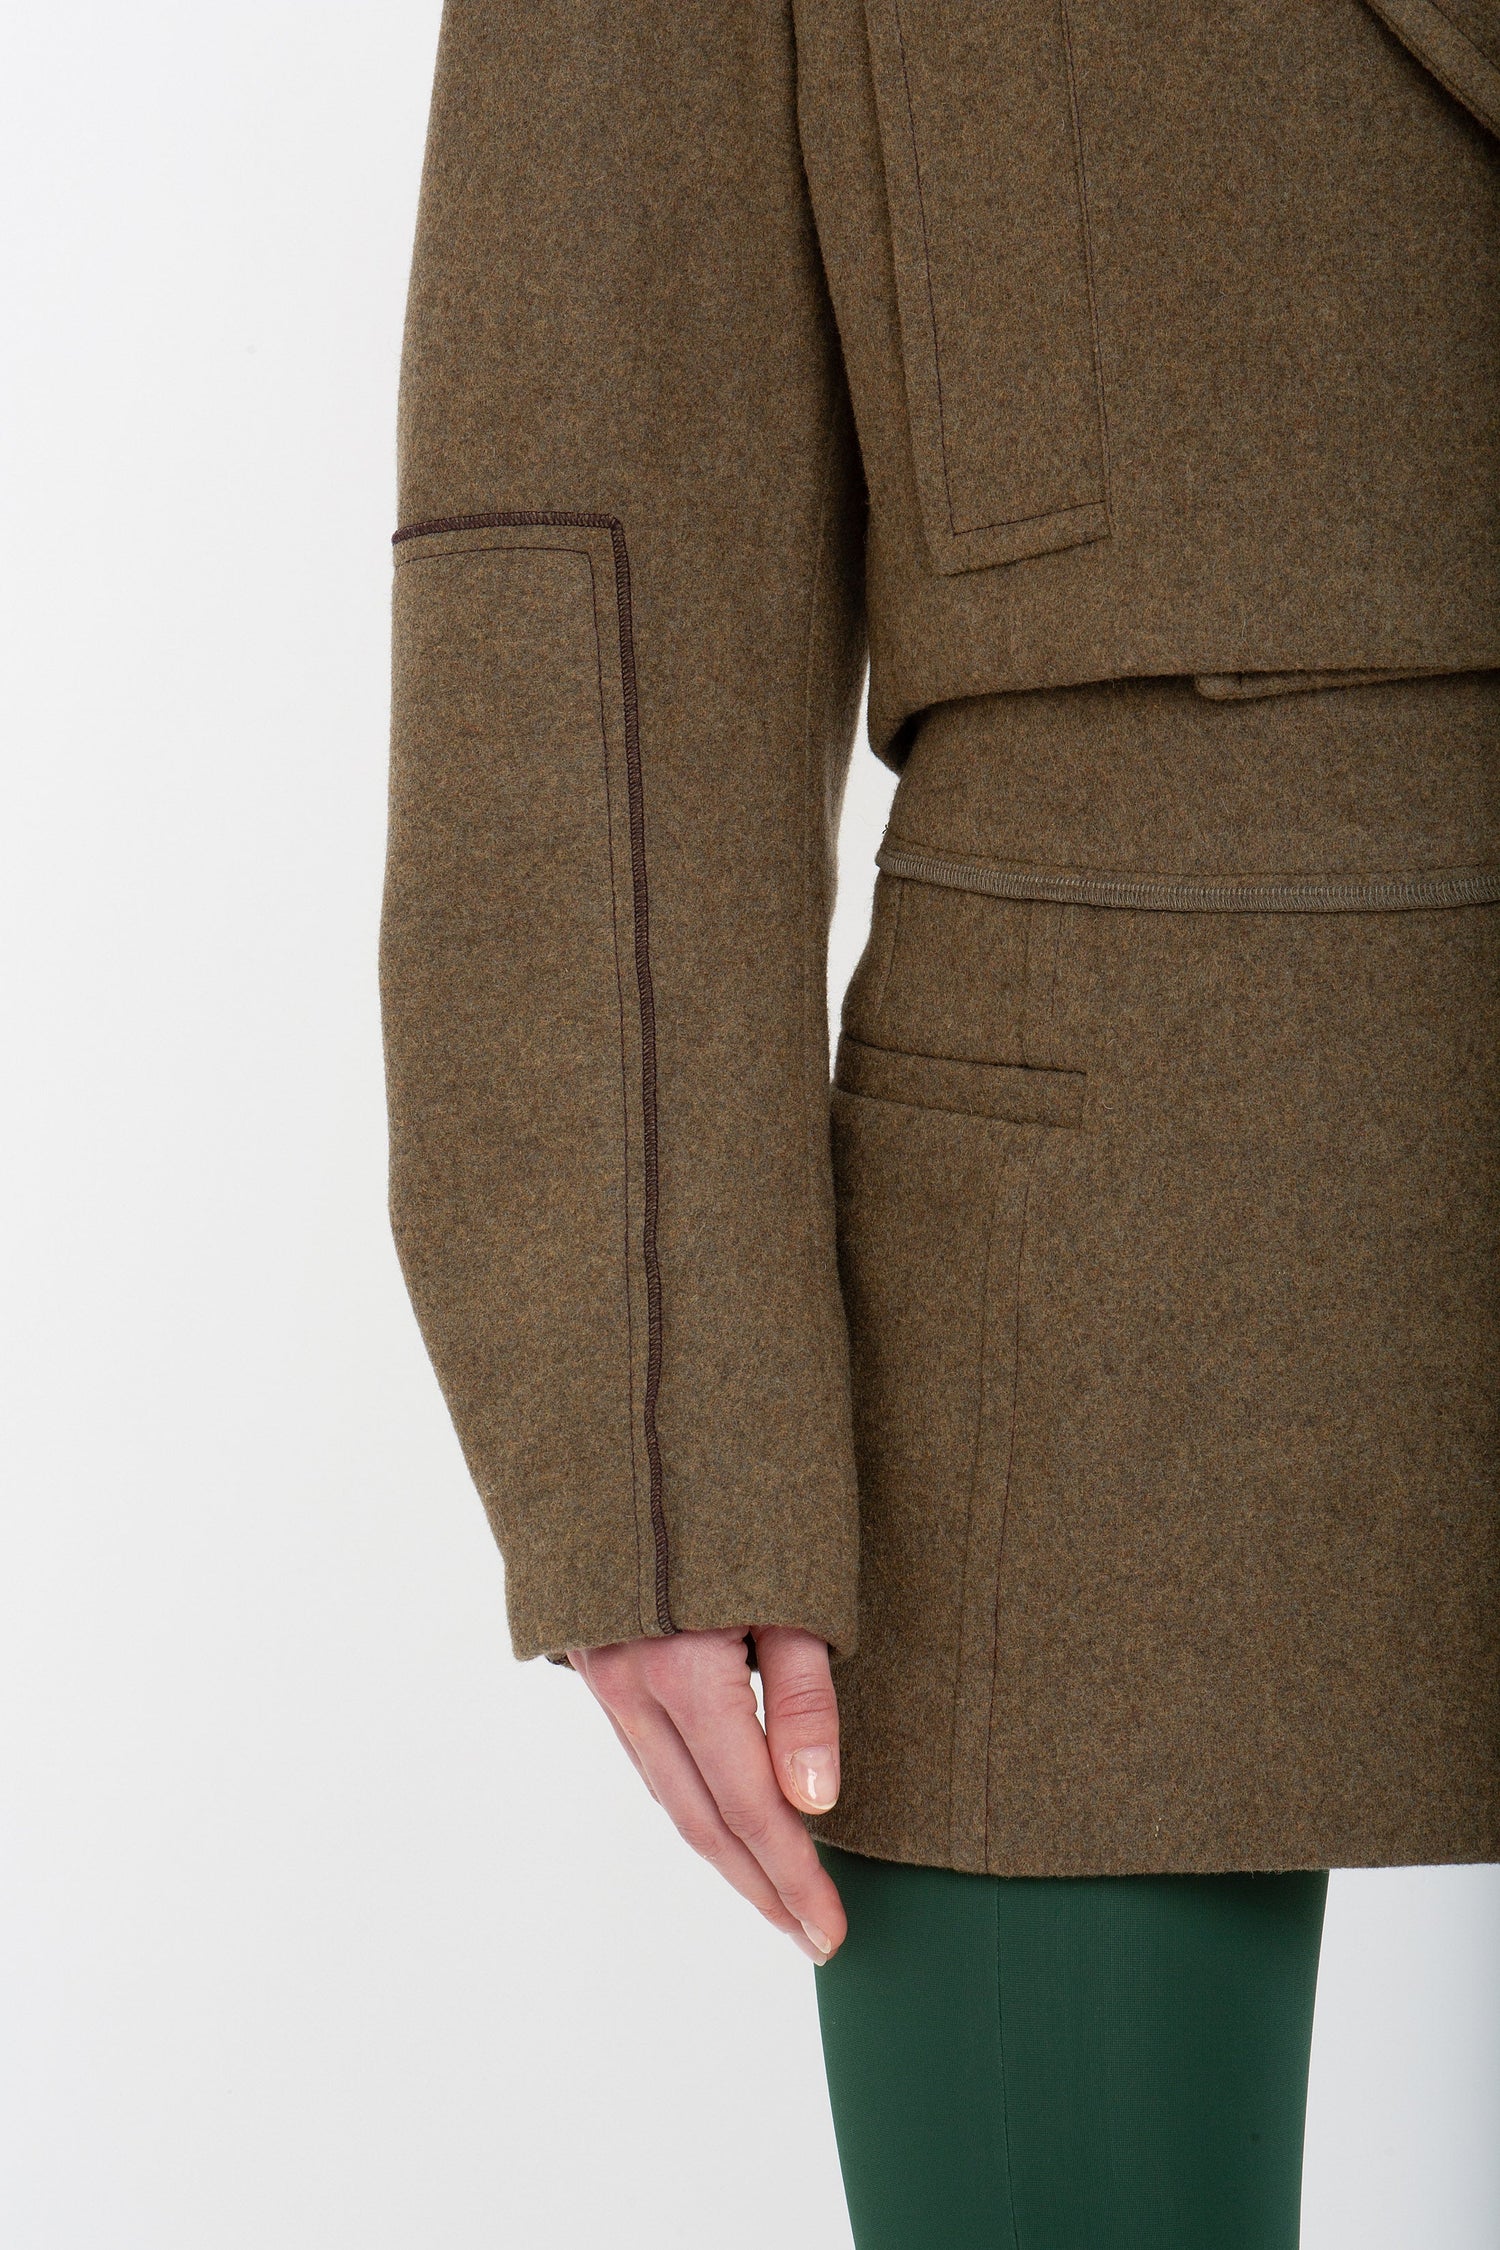 Close-up of a person wearing a Tailored Mini Skirt In Khaki by Victoria Beckham and green pants, showing the side seam and pocket detail of the coat, with their left arm resting at their side.